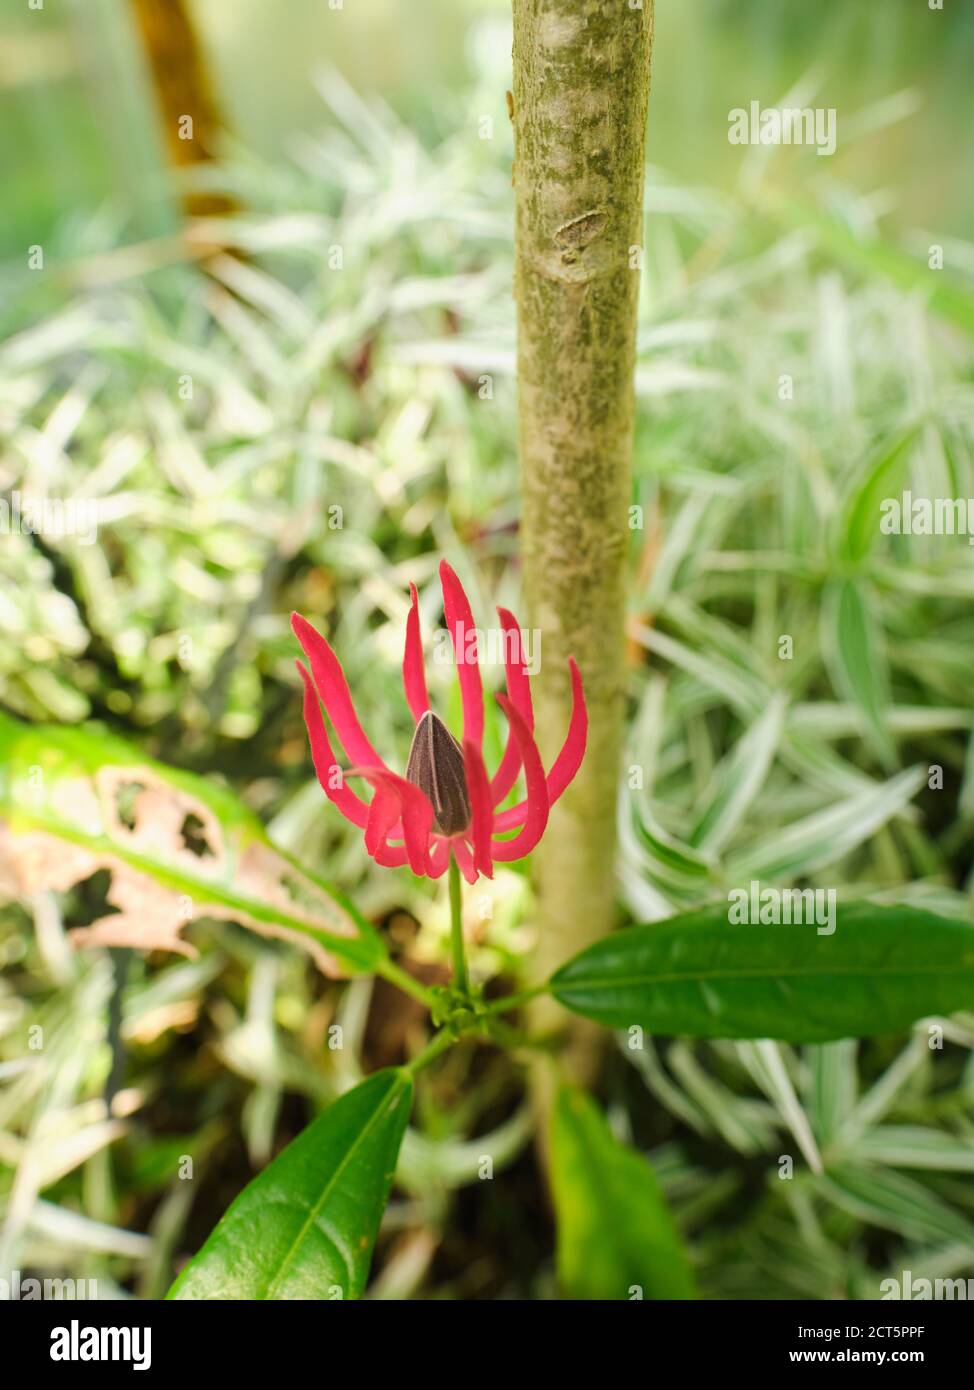 Pavonia multiflora or the Brazilian candles. Glossy foliage with lance-shaped leaves. Red or dark pink bracts surrounding cone-shaped bud. Stock Photo